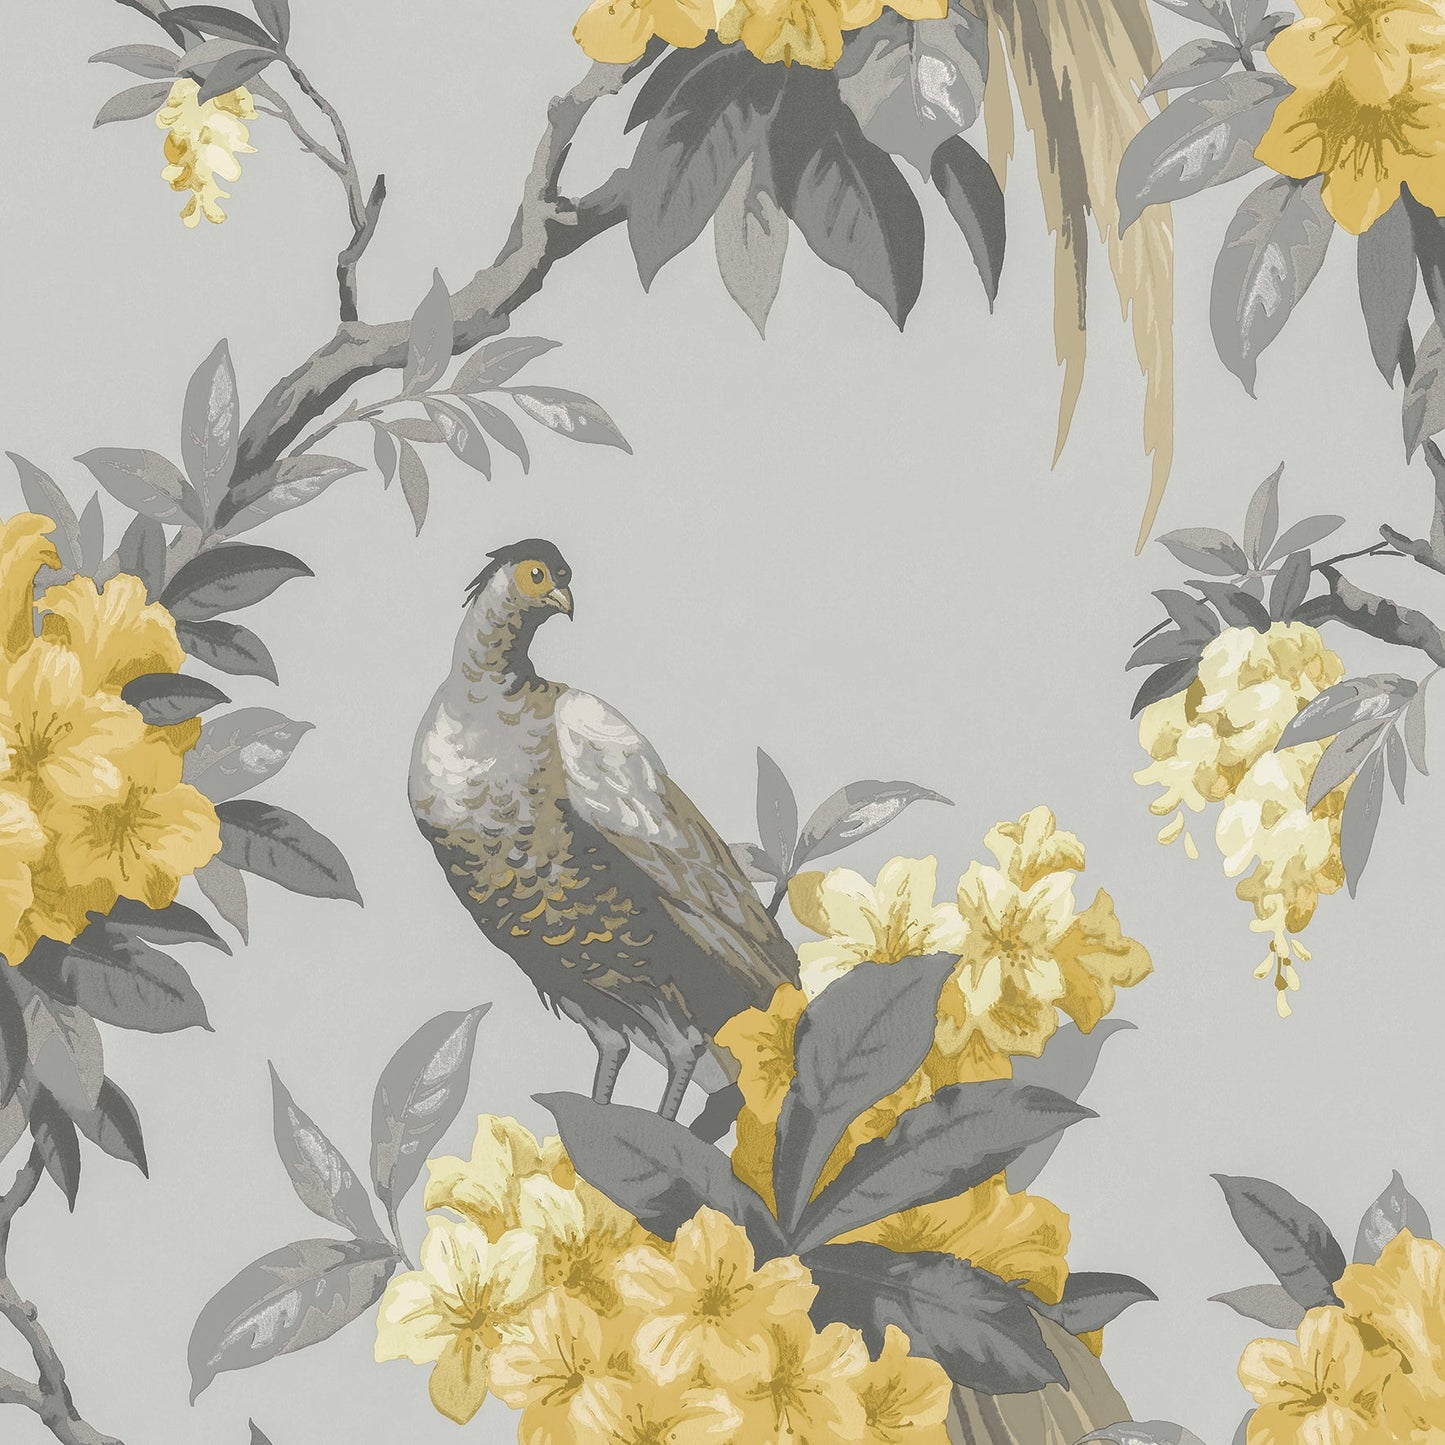 Looking M1662 Archive Collection Golden Pheasant Grey Floral Wallpaper Grey/Mustard Brewster